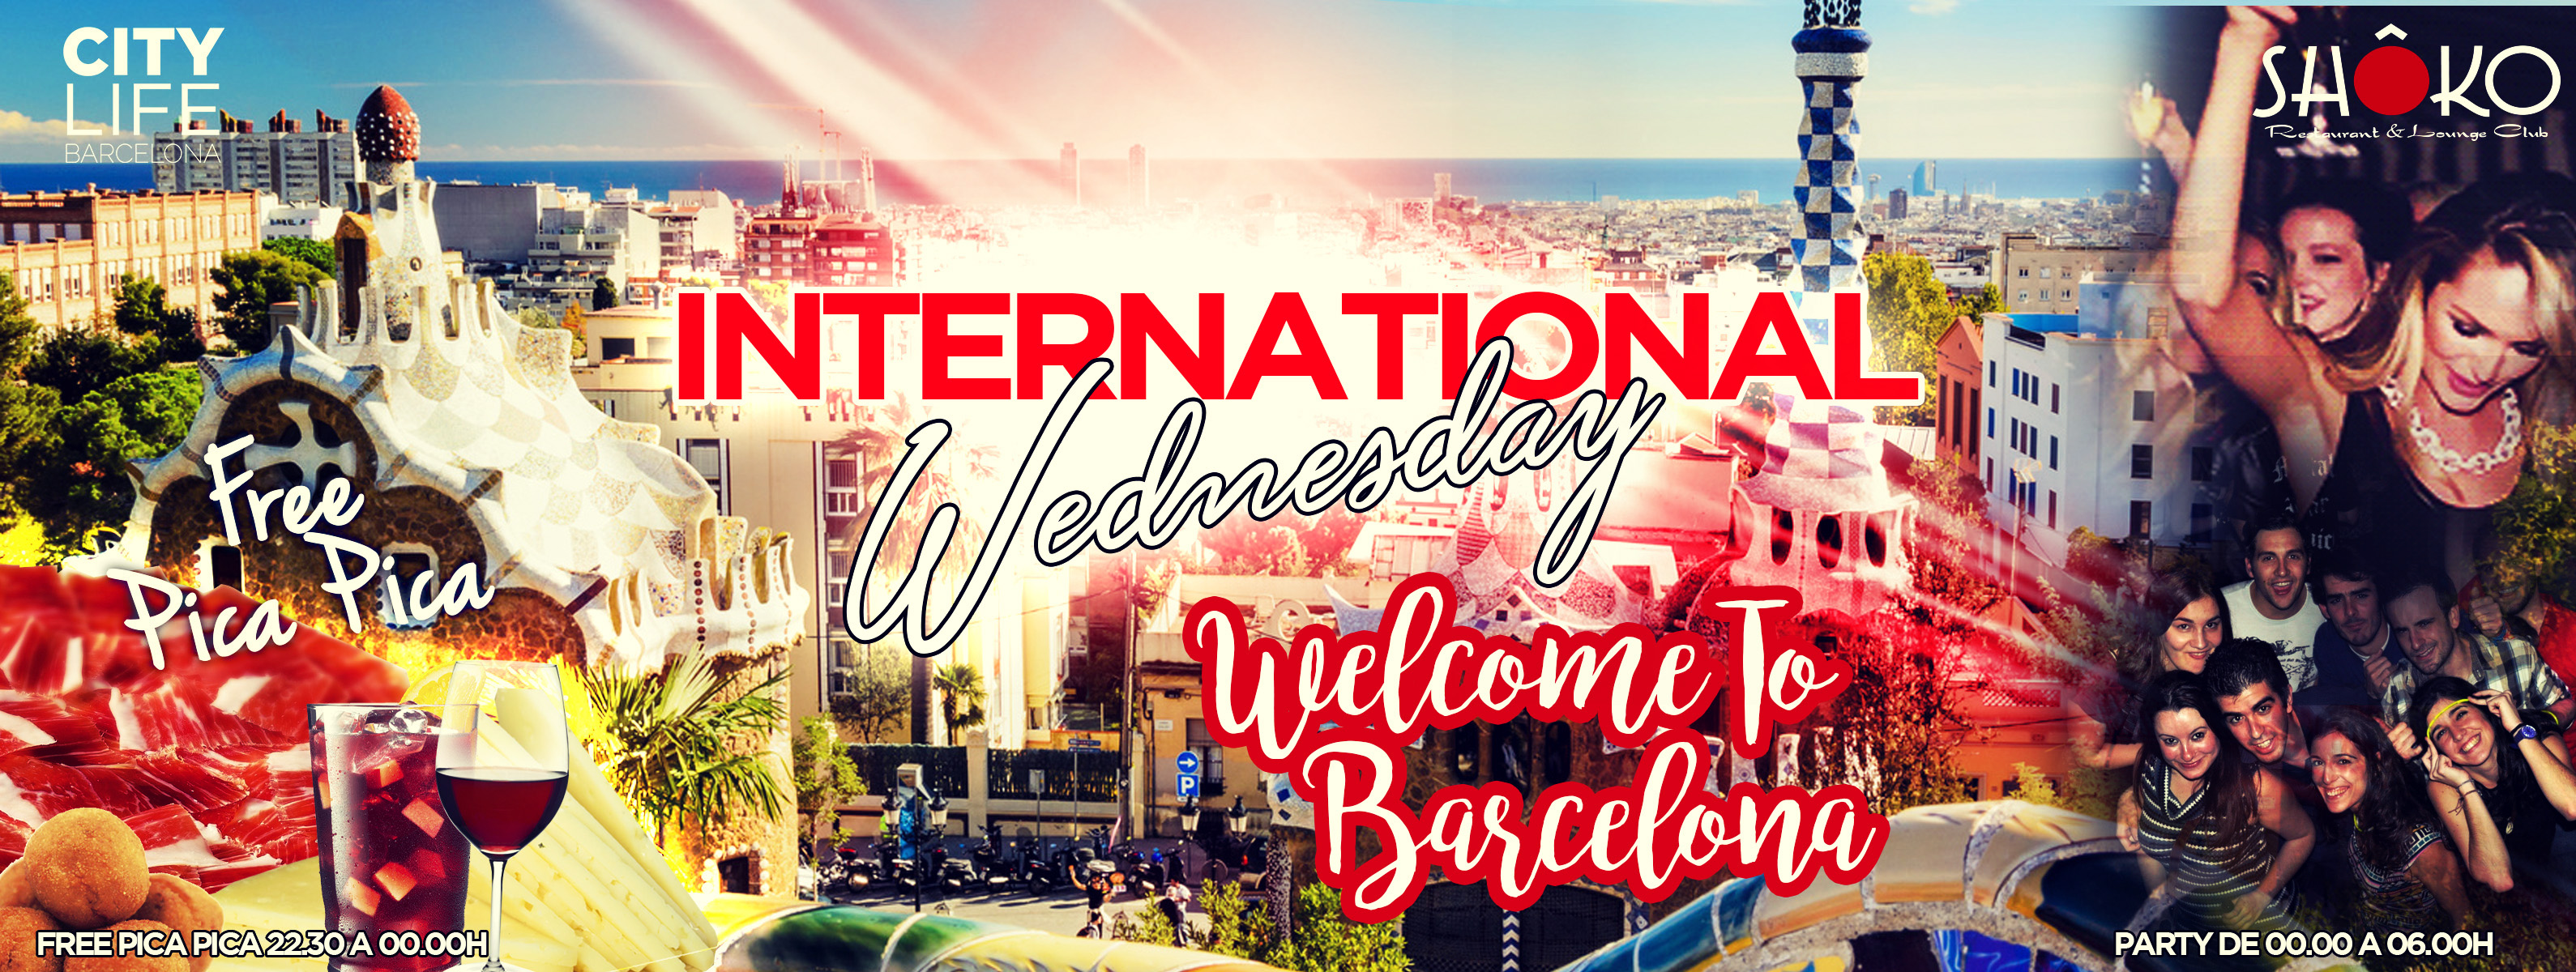 Welcome to Barcelona – Free Dinner, Open Bar & Party! @Shoko Lounge Club!